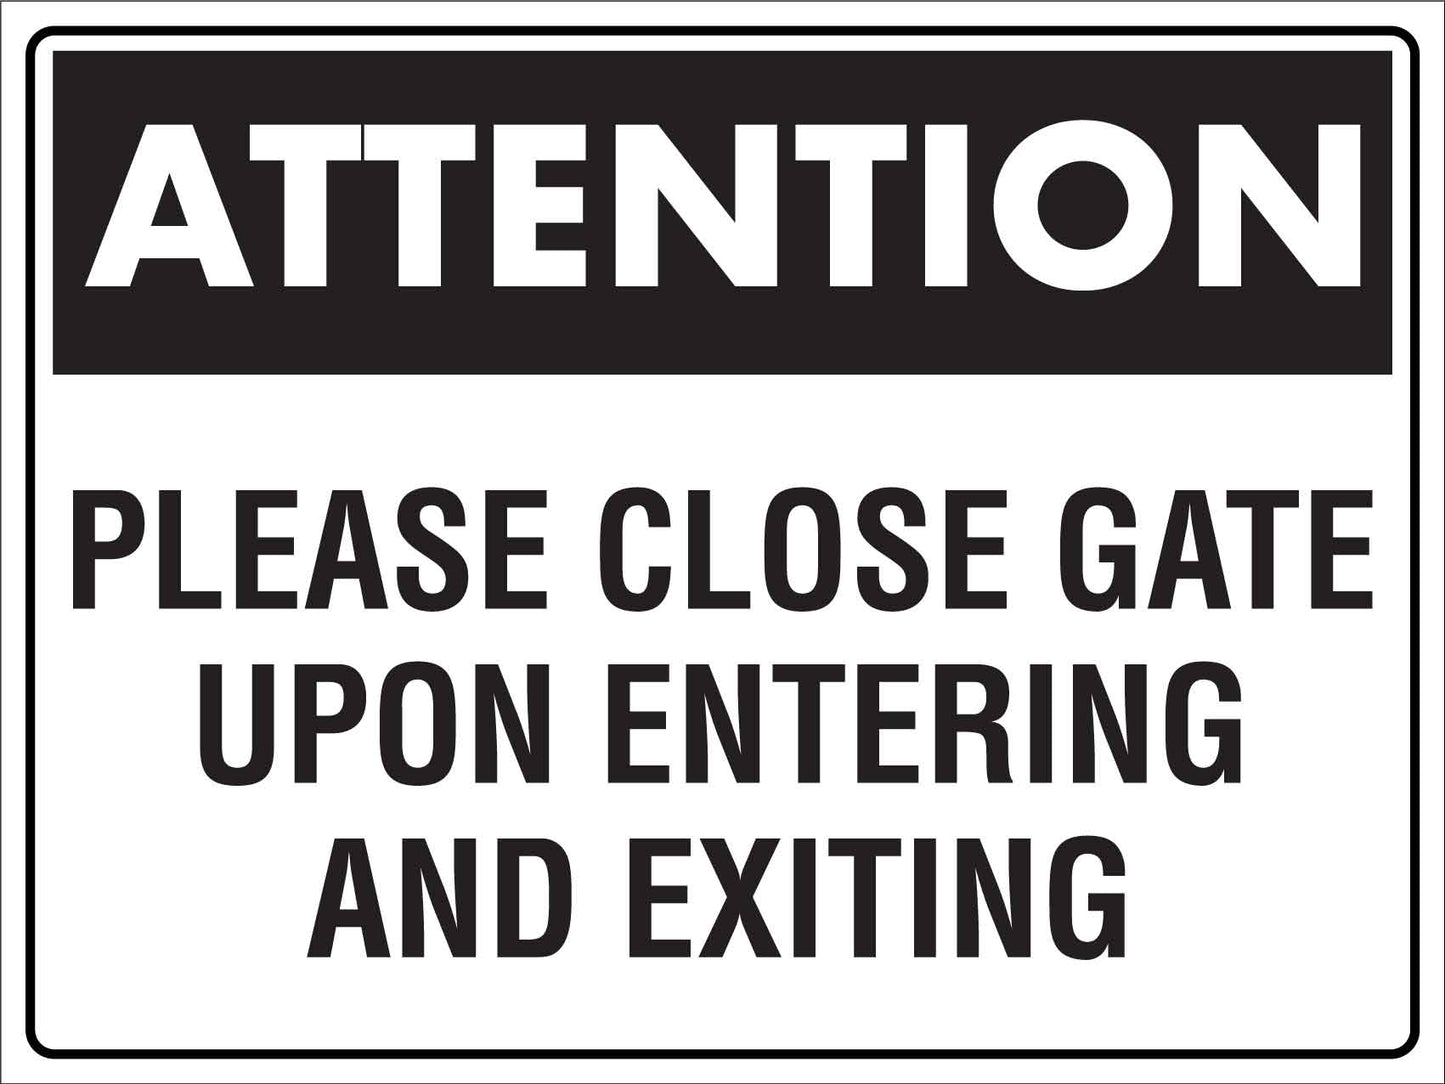 Attention Please Close Gate Upon Entering and Exiting Sign